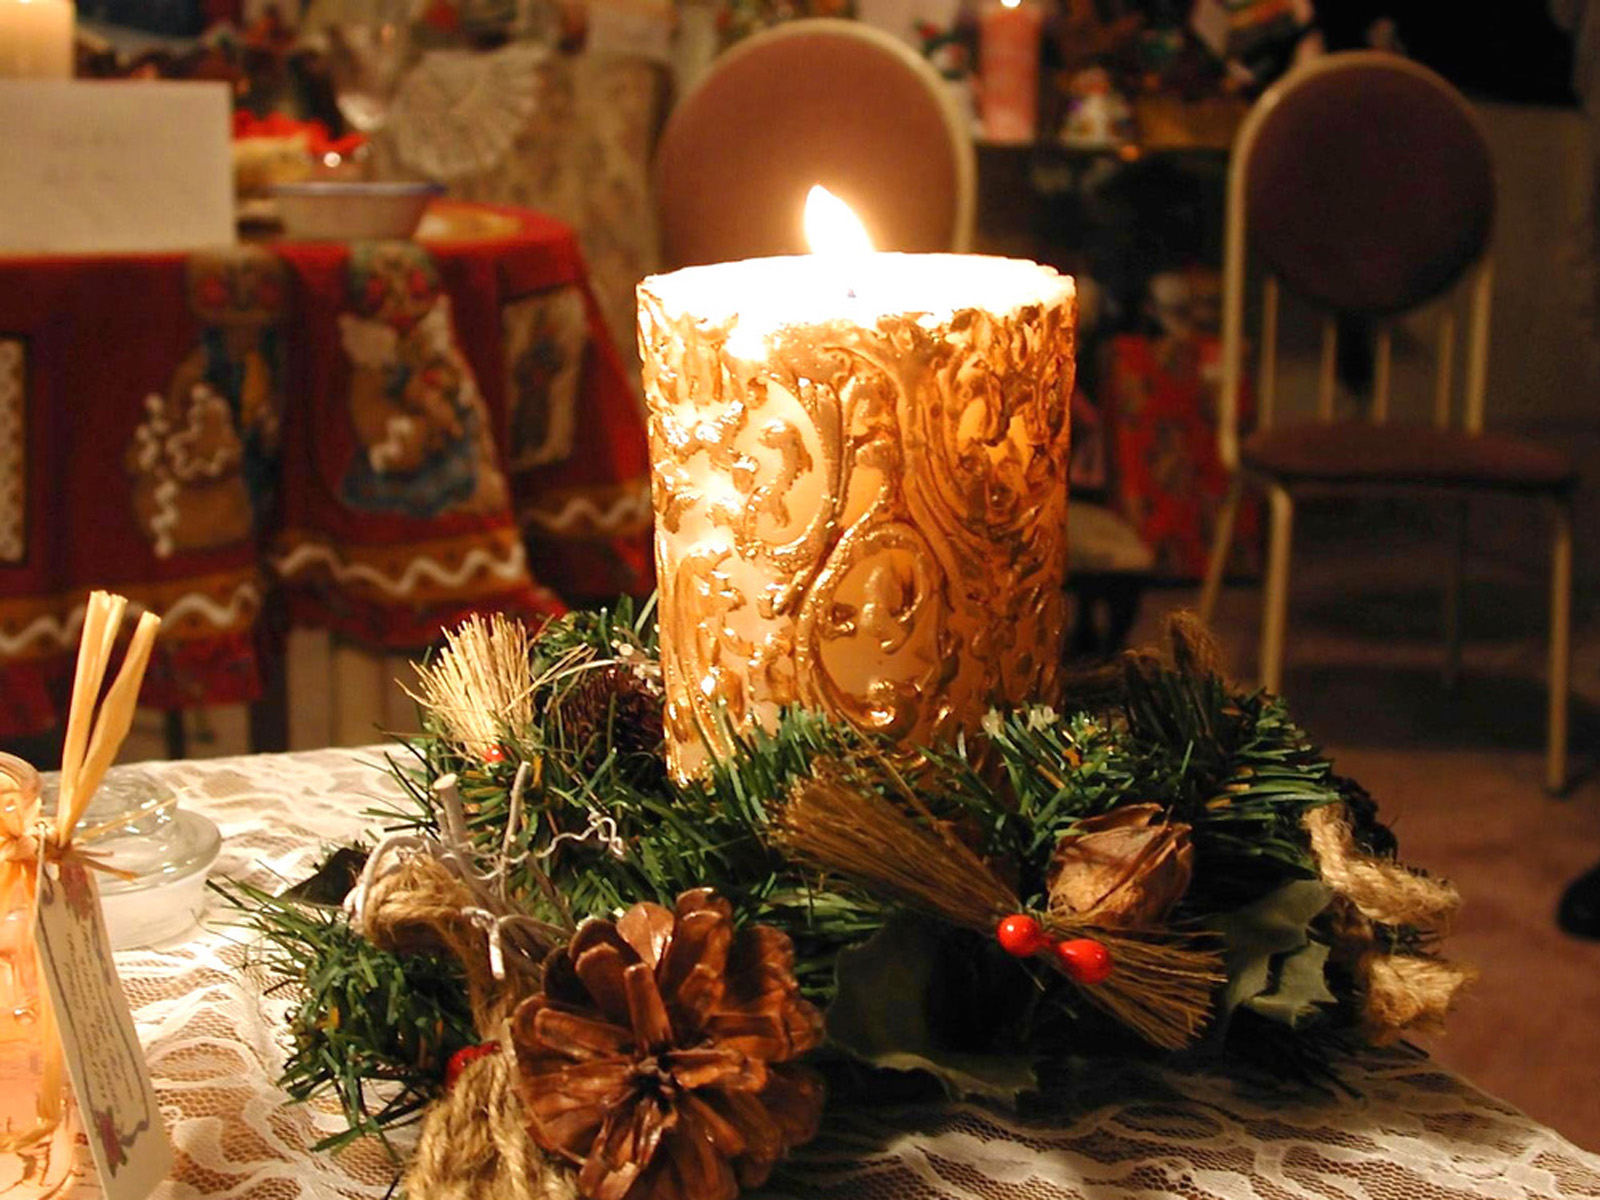 christmas candle wallpaper,candle,lighting,centrepiece,christmas,floral design